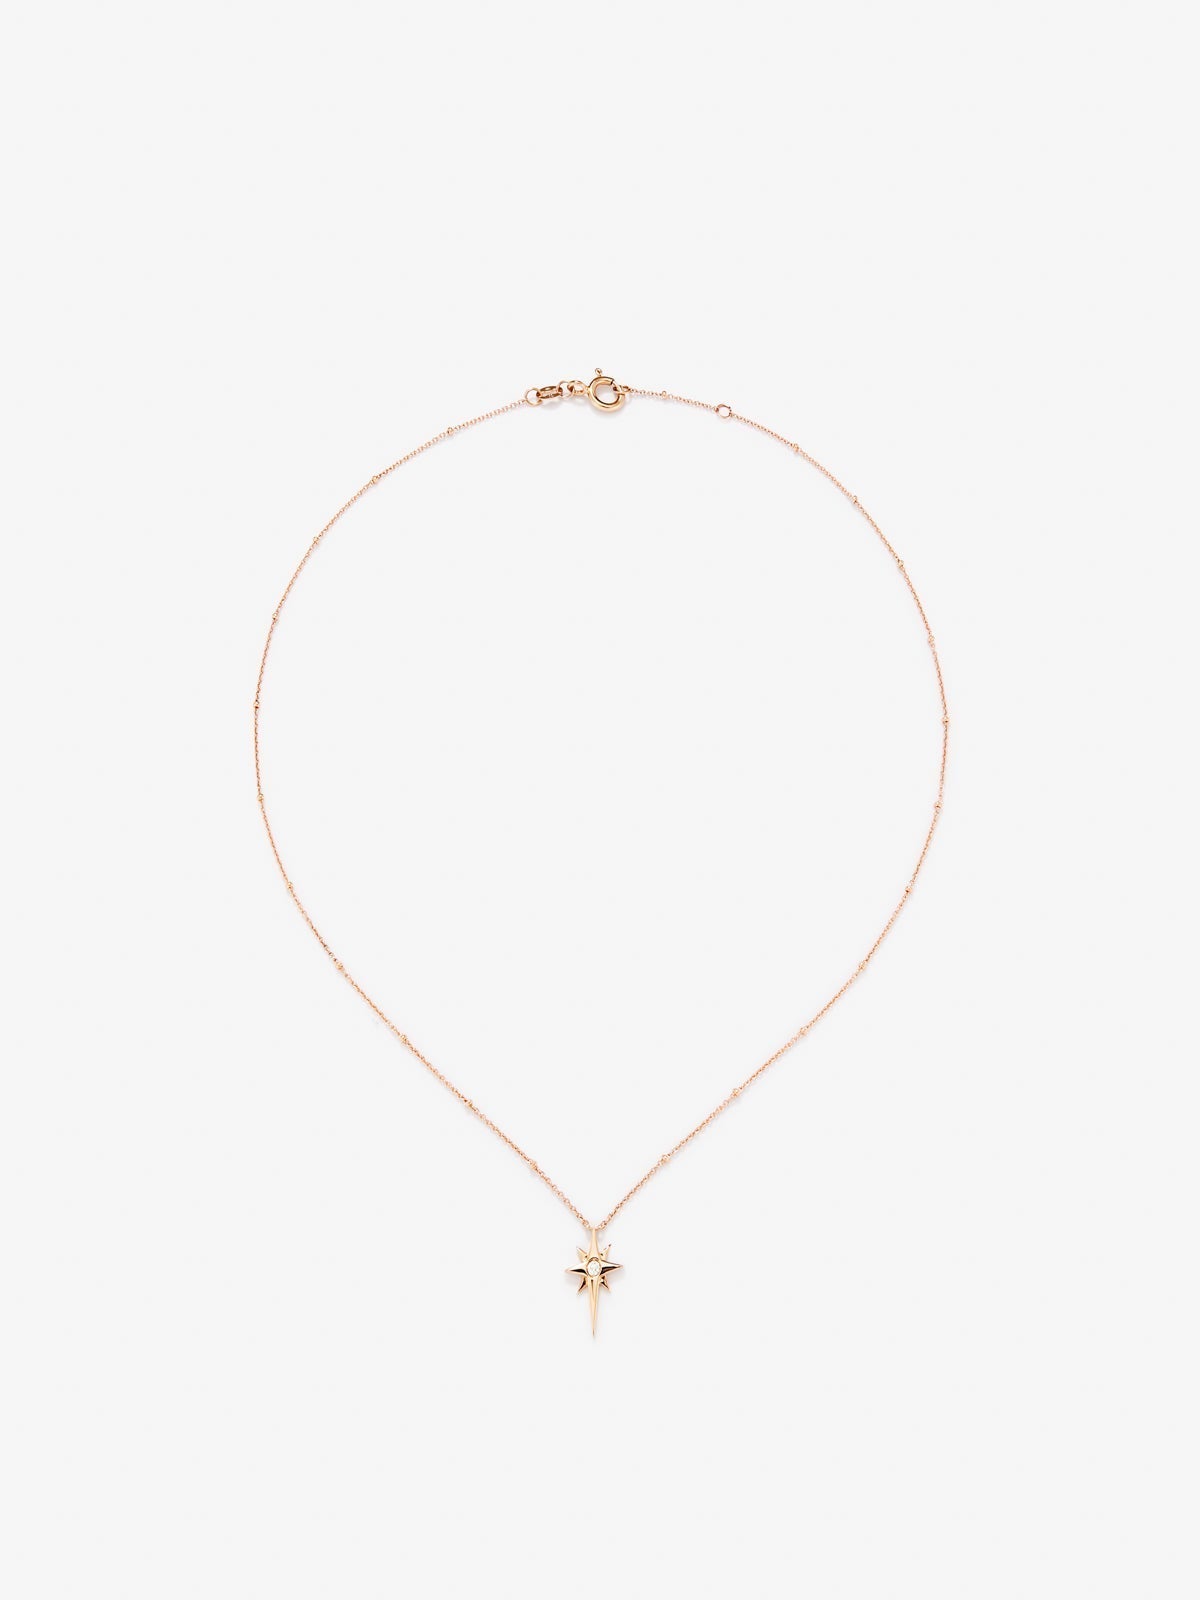 Pendant chain with 18K rose gold star with diamond.